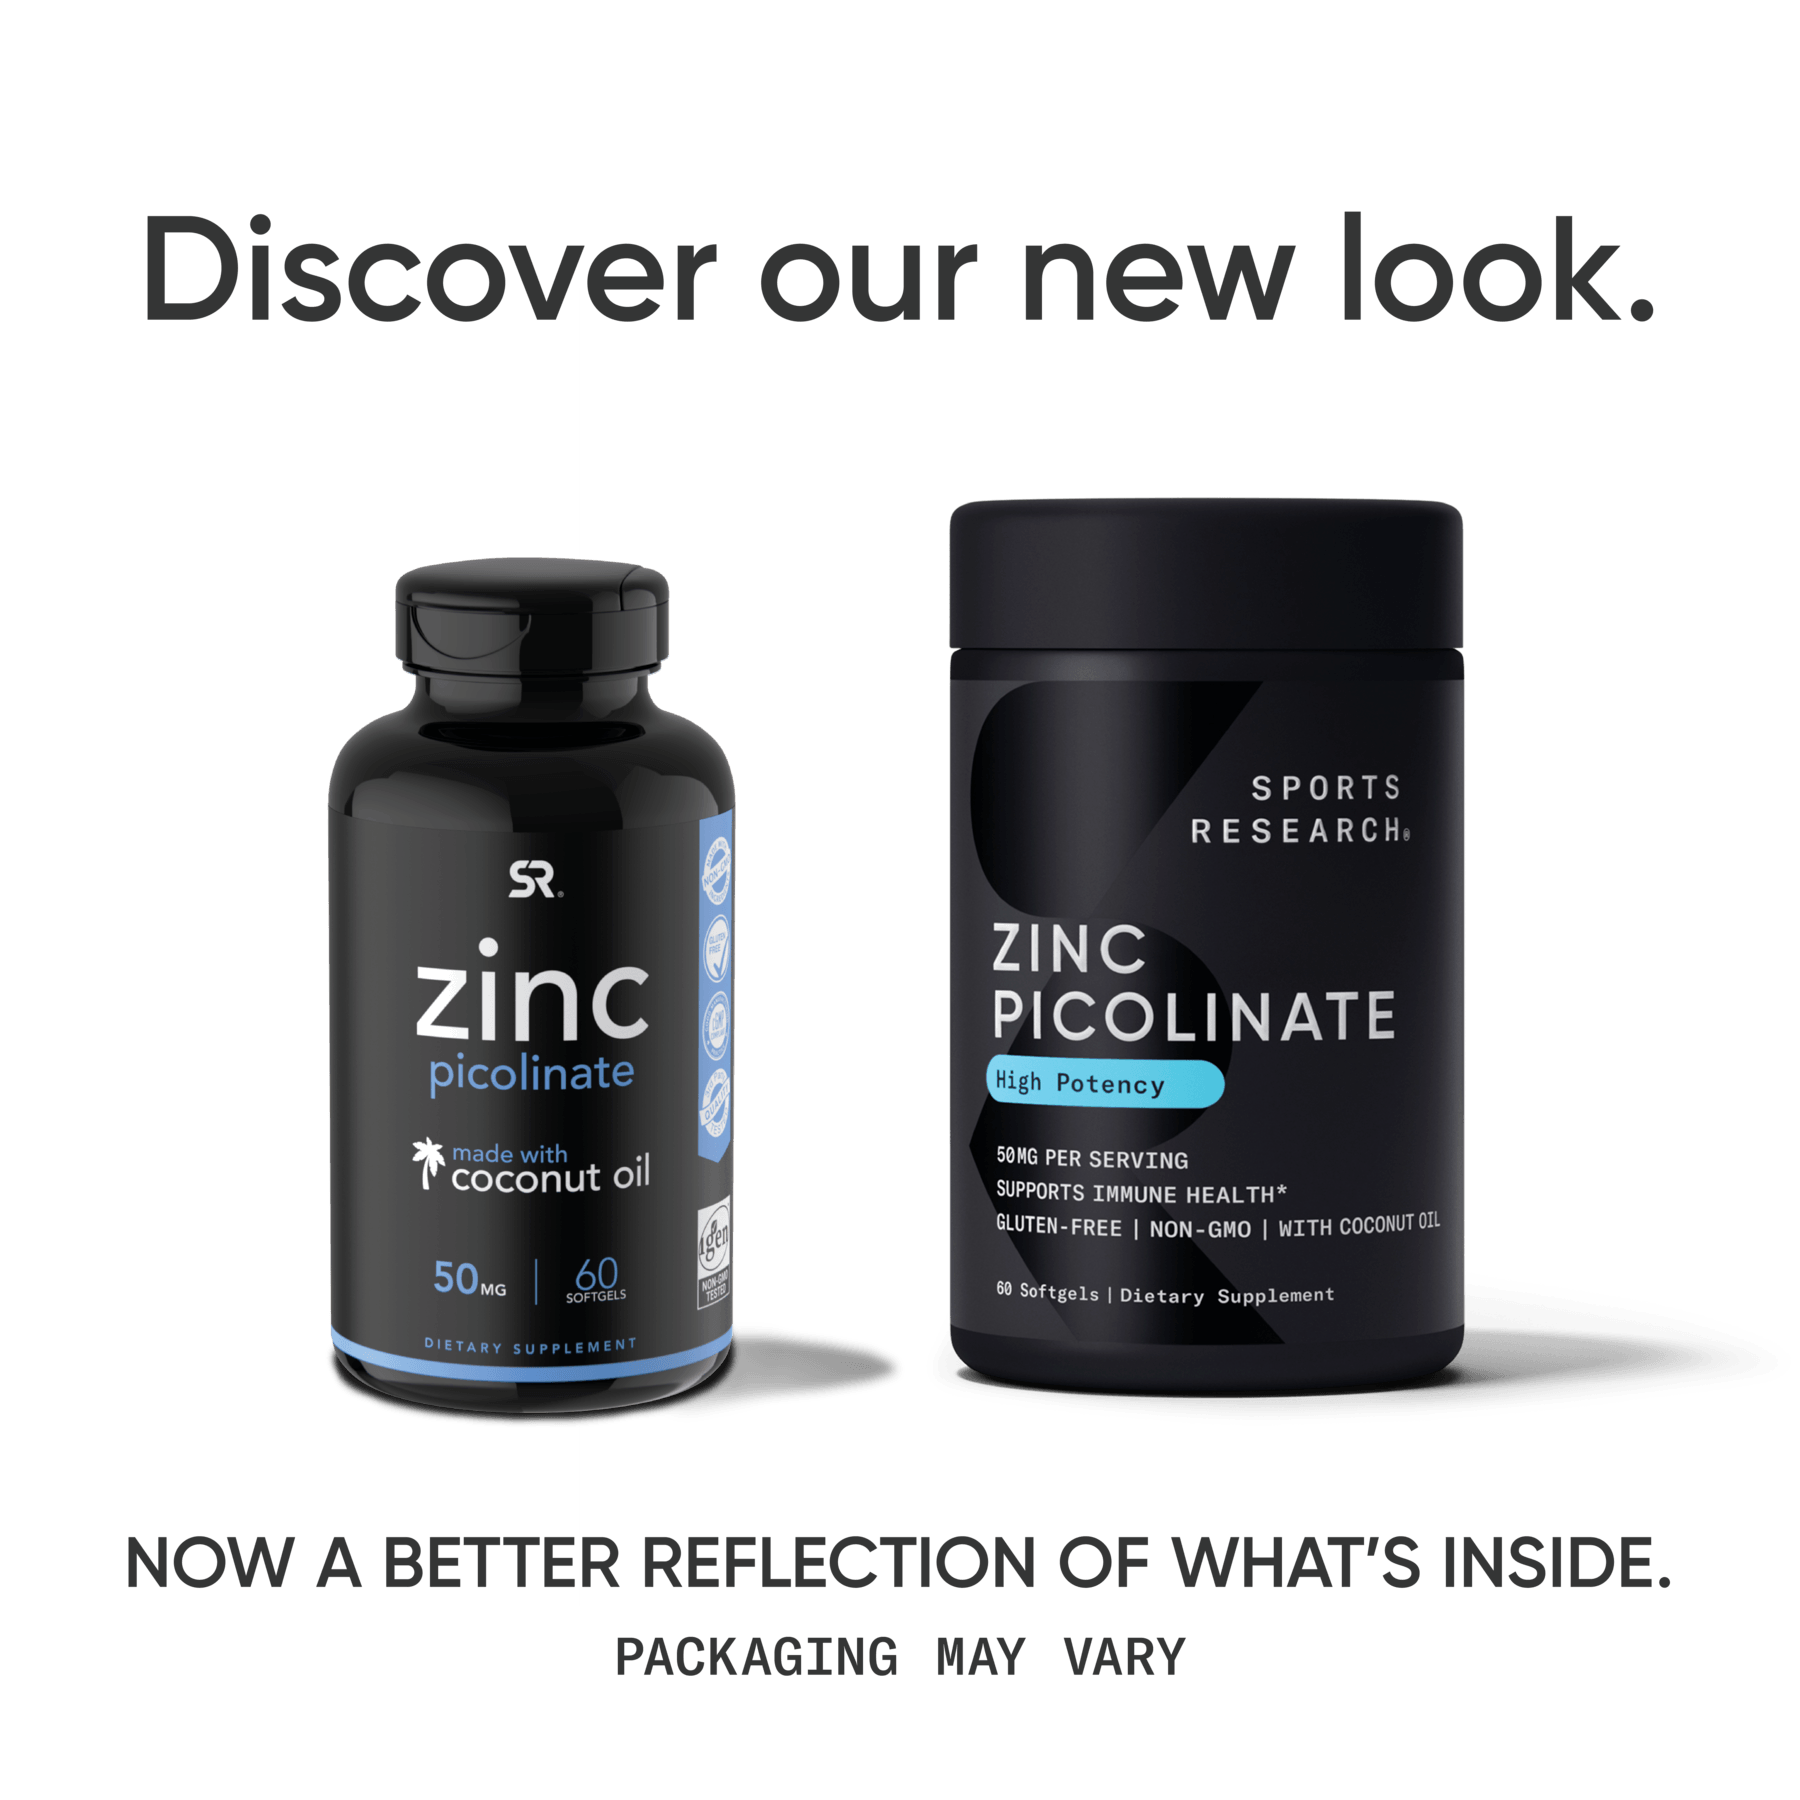 A bottle of Sports Research Zinc Picolinate with Coconut Oil and a bottle of probiotics.